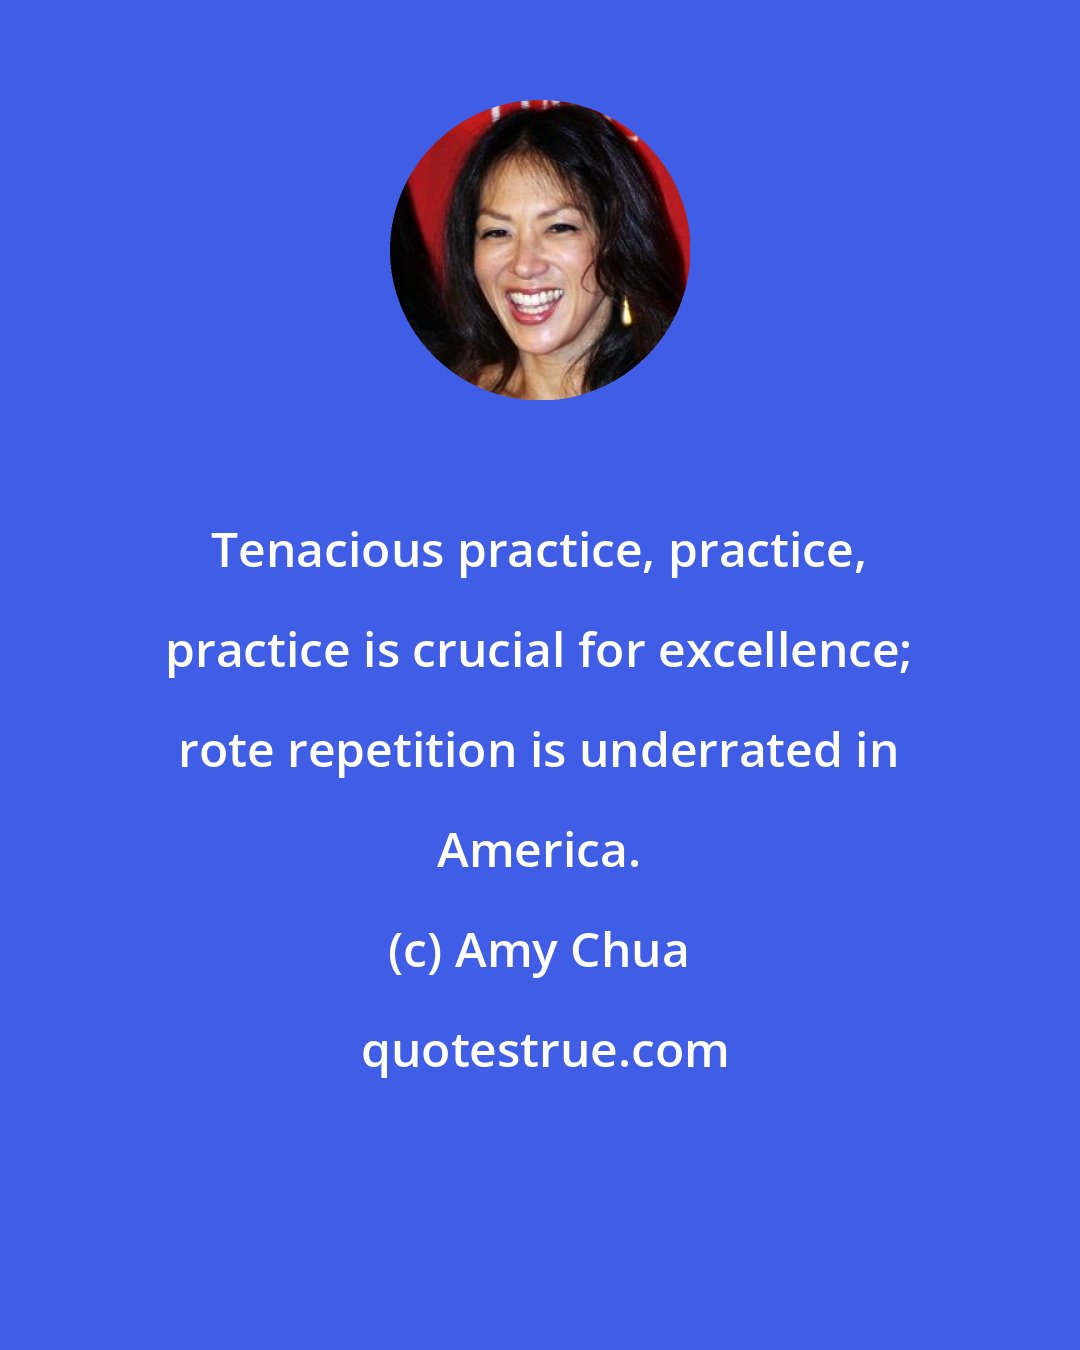 Amy Chua: Tenacious practice, practice, practice is crucial for excellence; rote repetition is underrated in America.